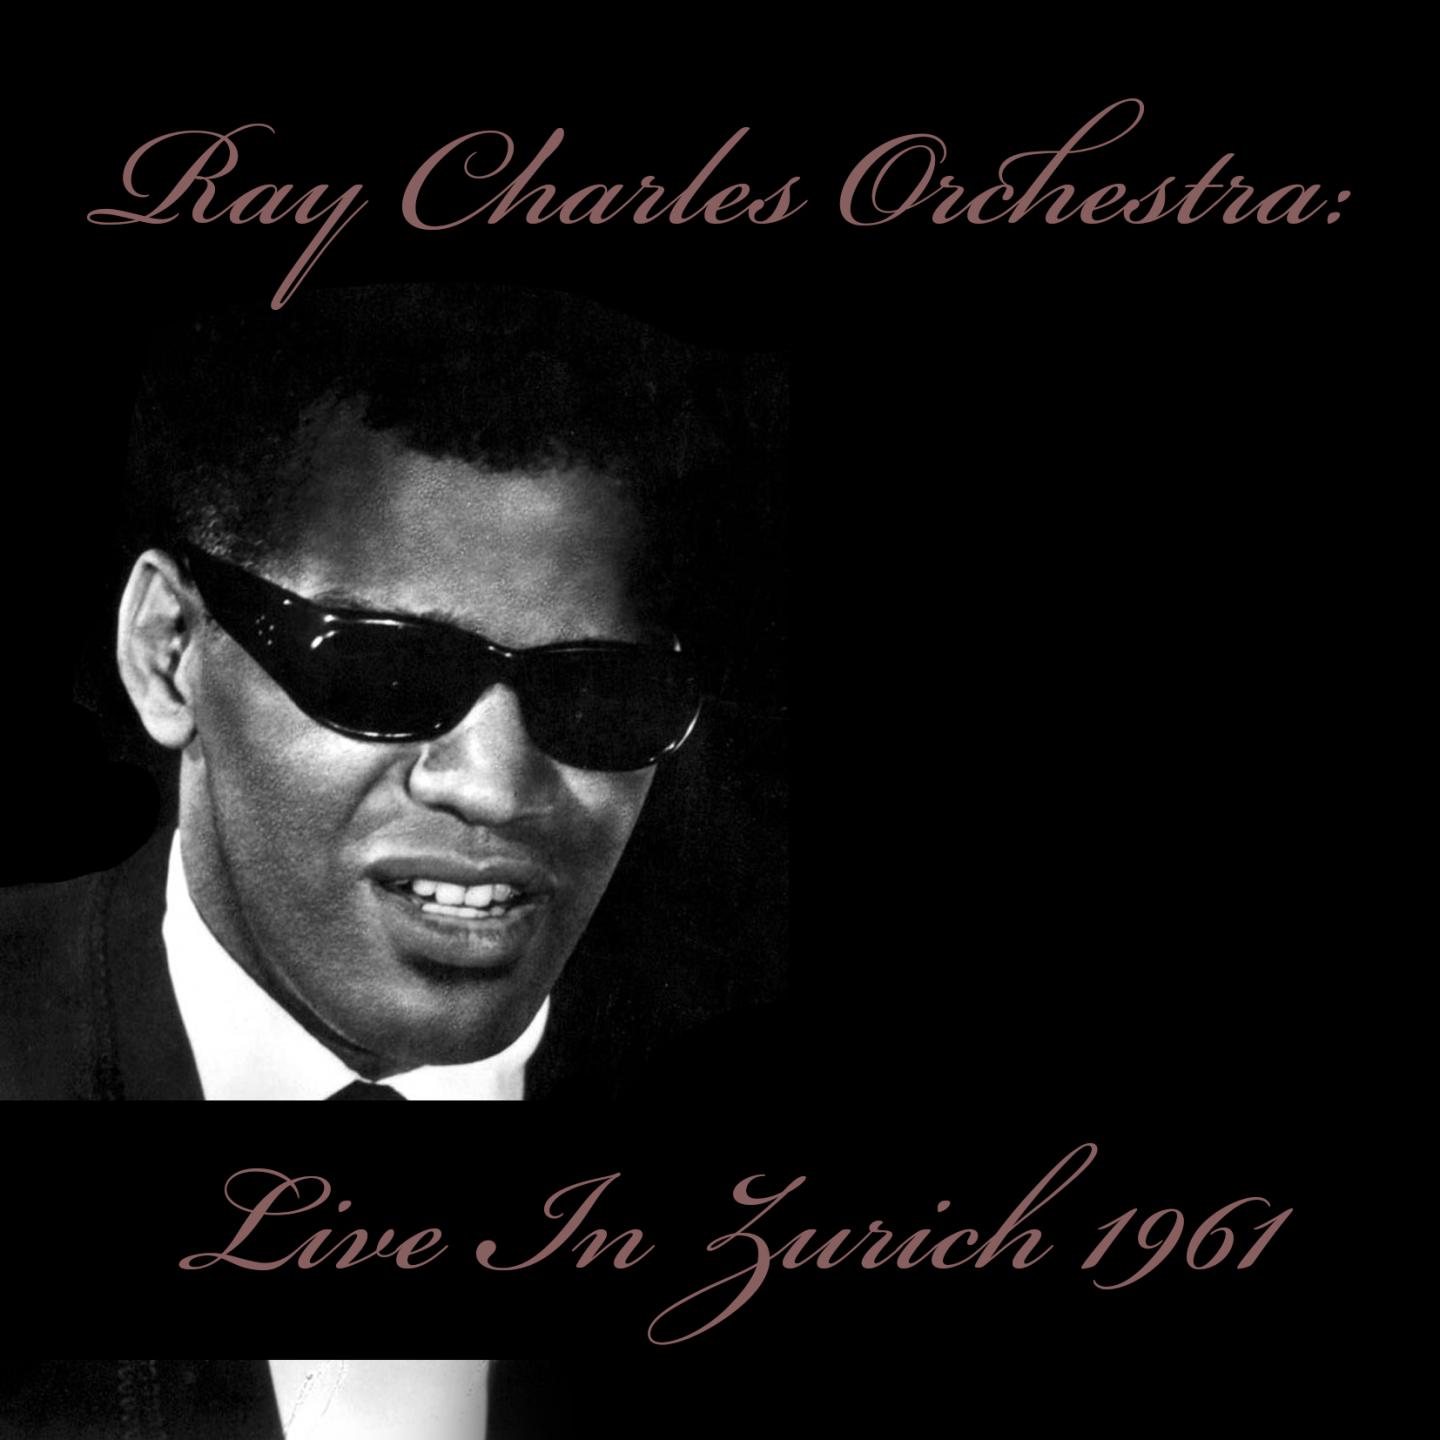 Ray Charles Orchestra: Live in Zurich 1961